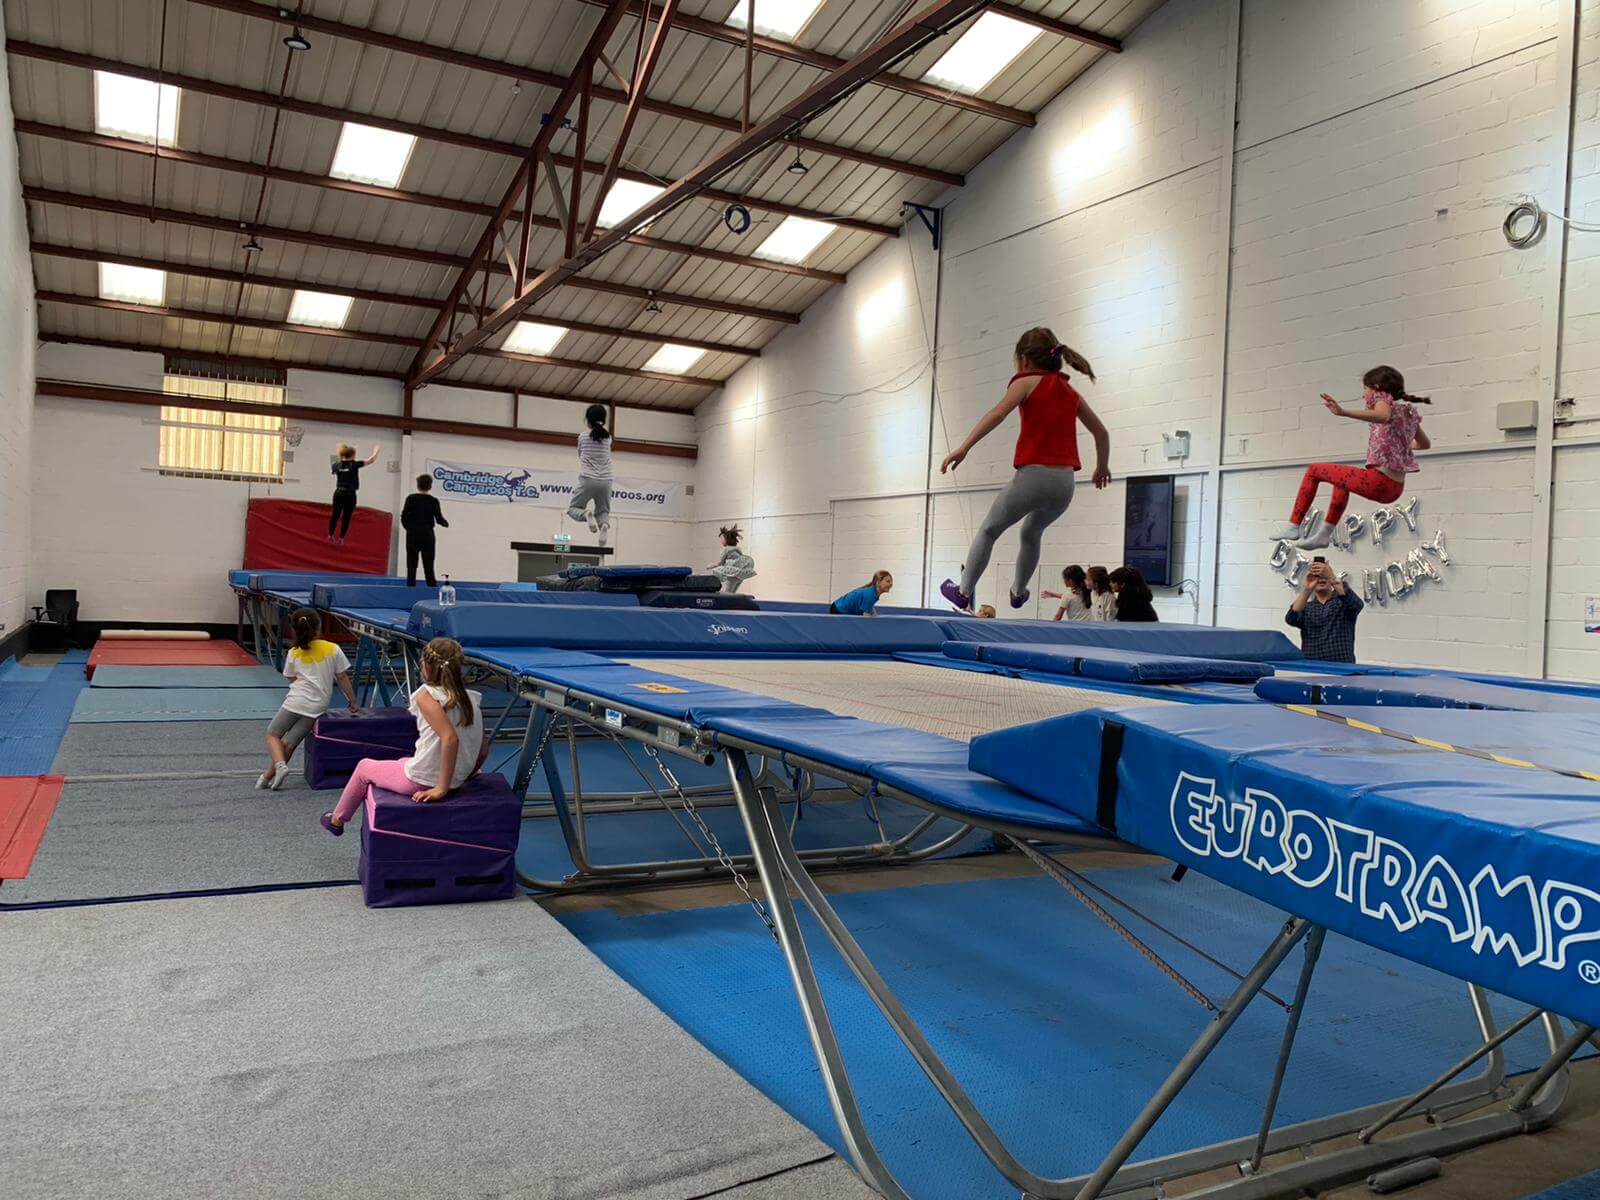 The main trampoline hall with gymnasts jumping on the trampolines